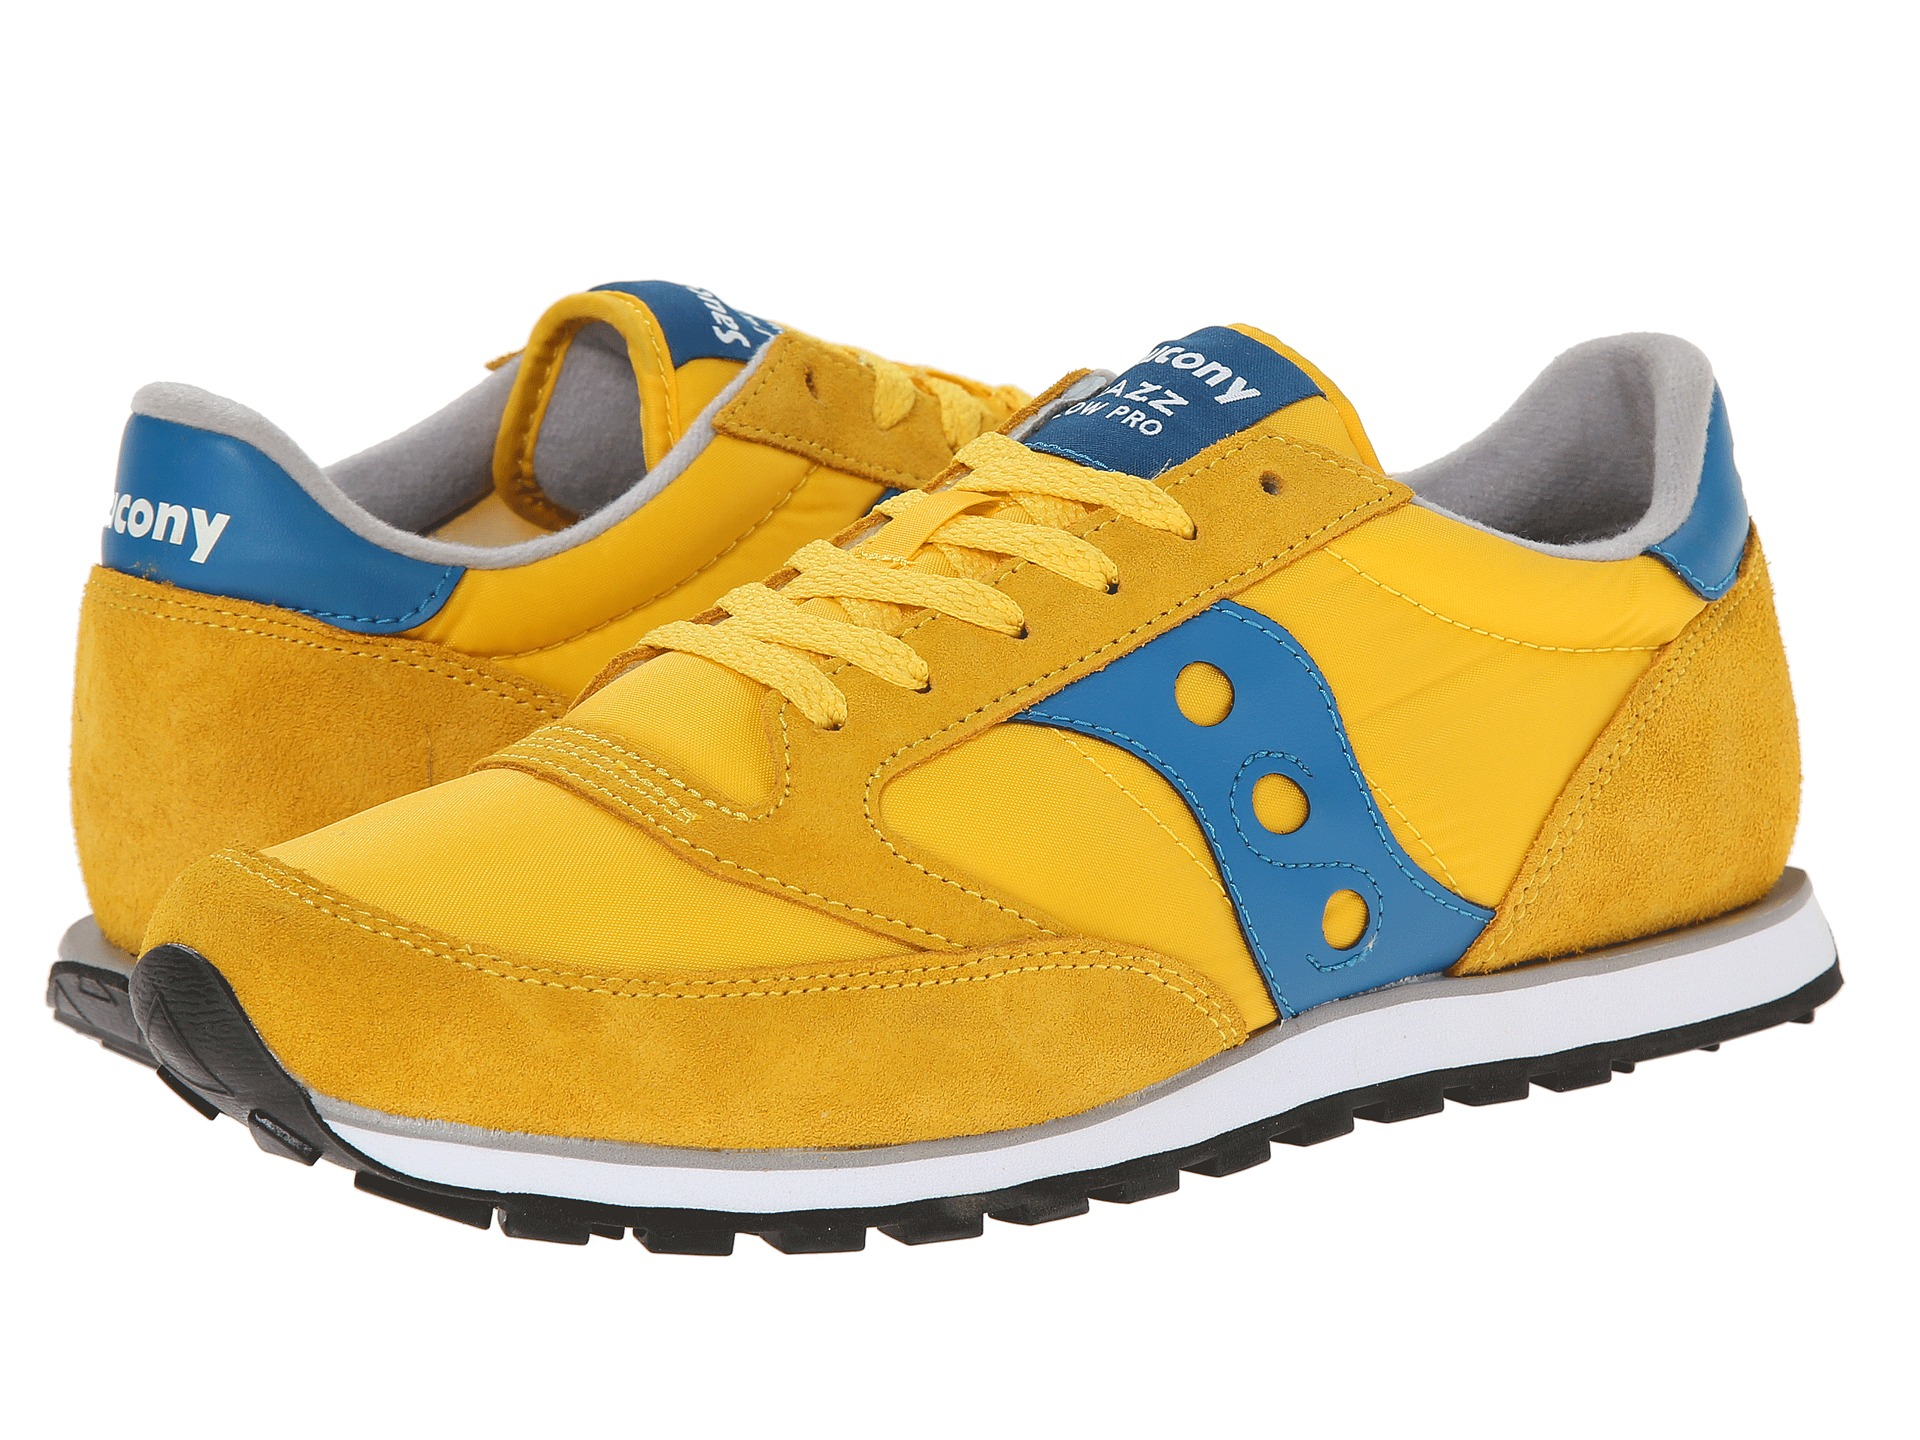 Saucony Jazz Low Pro in Yellow/Blue (Yellow) for Men - Lyst